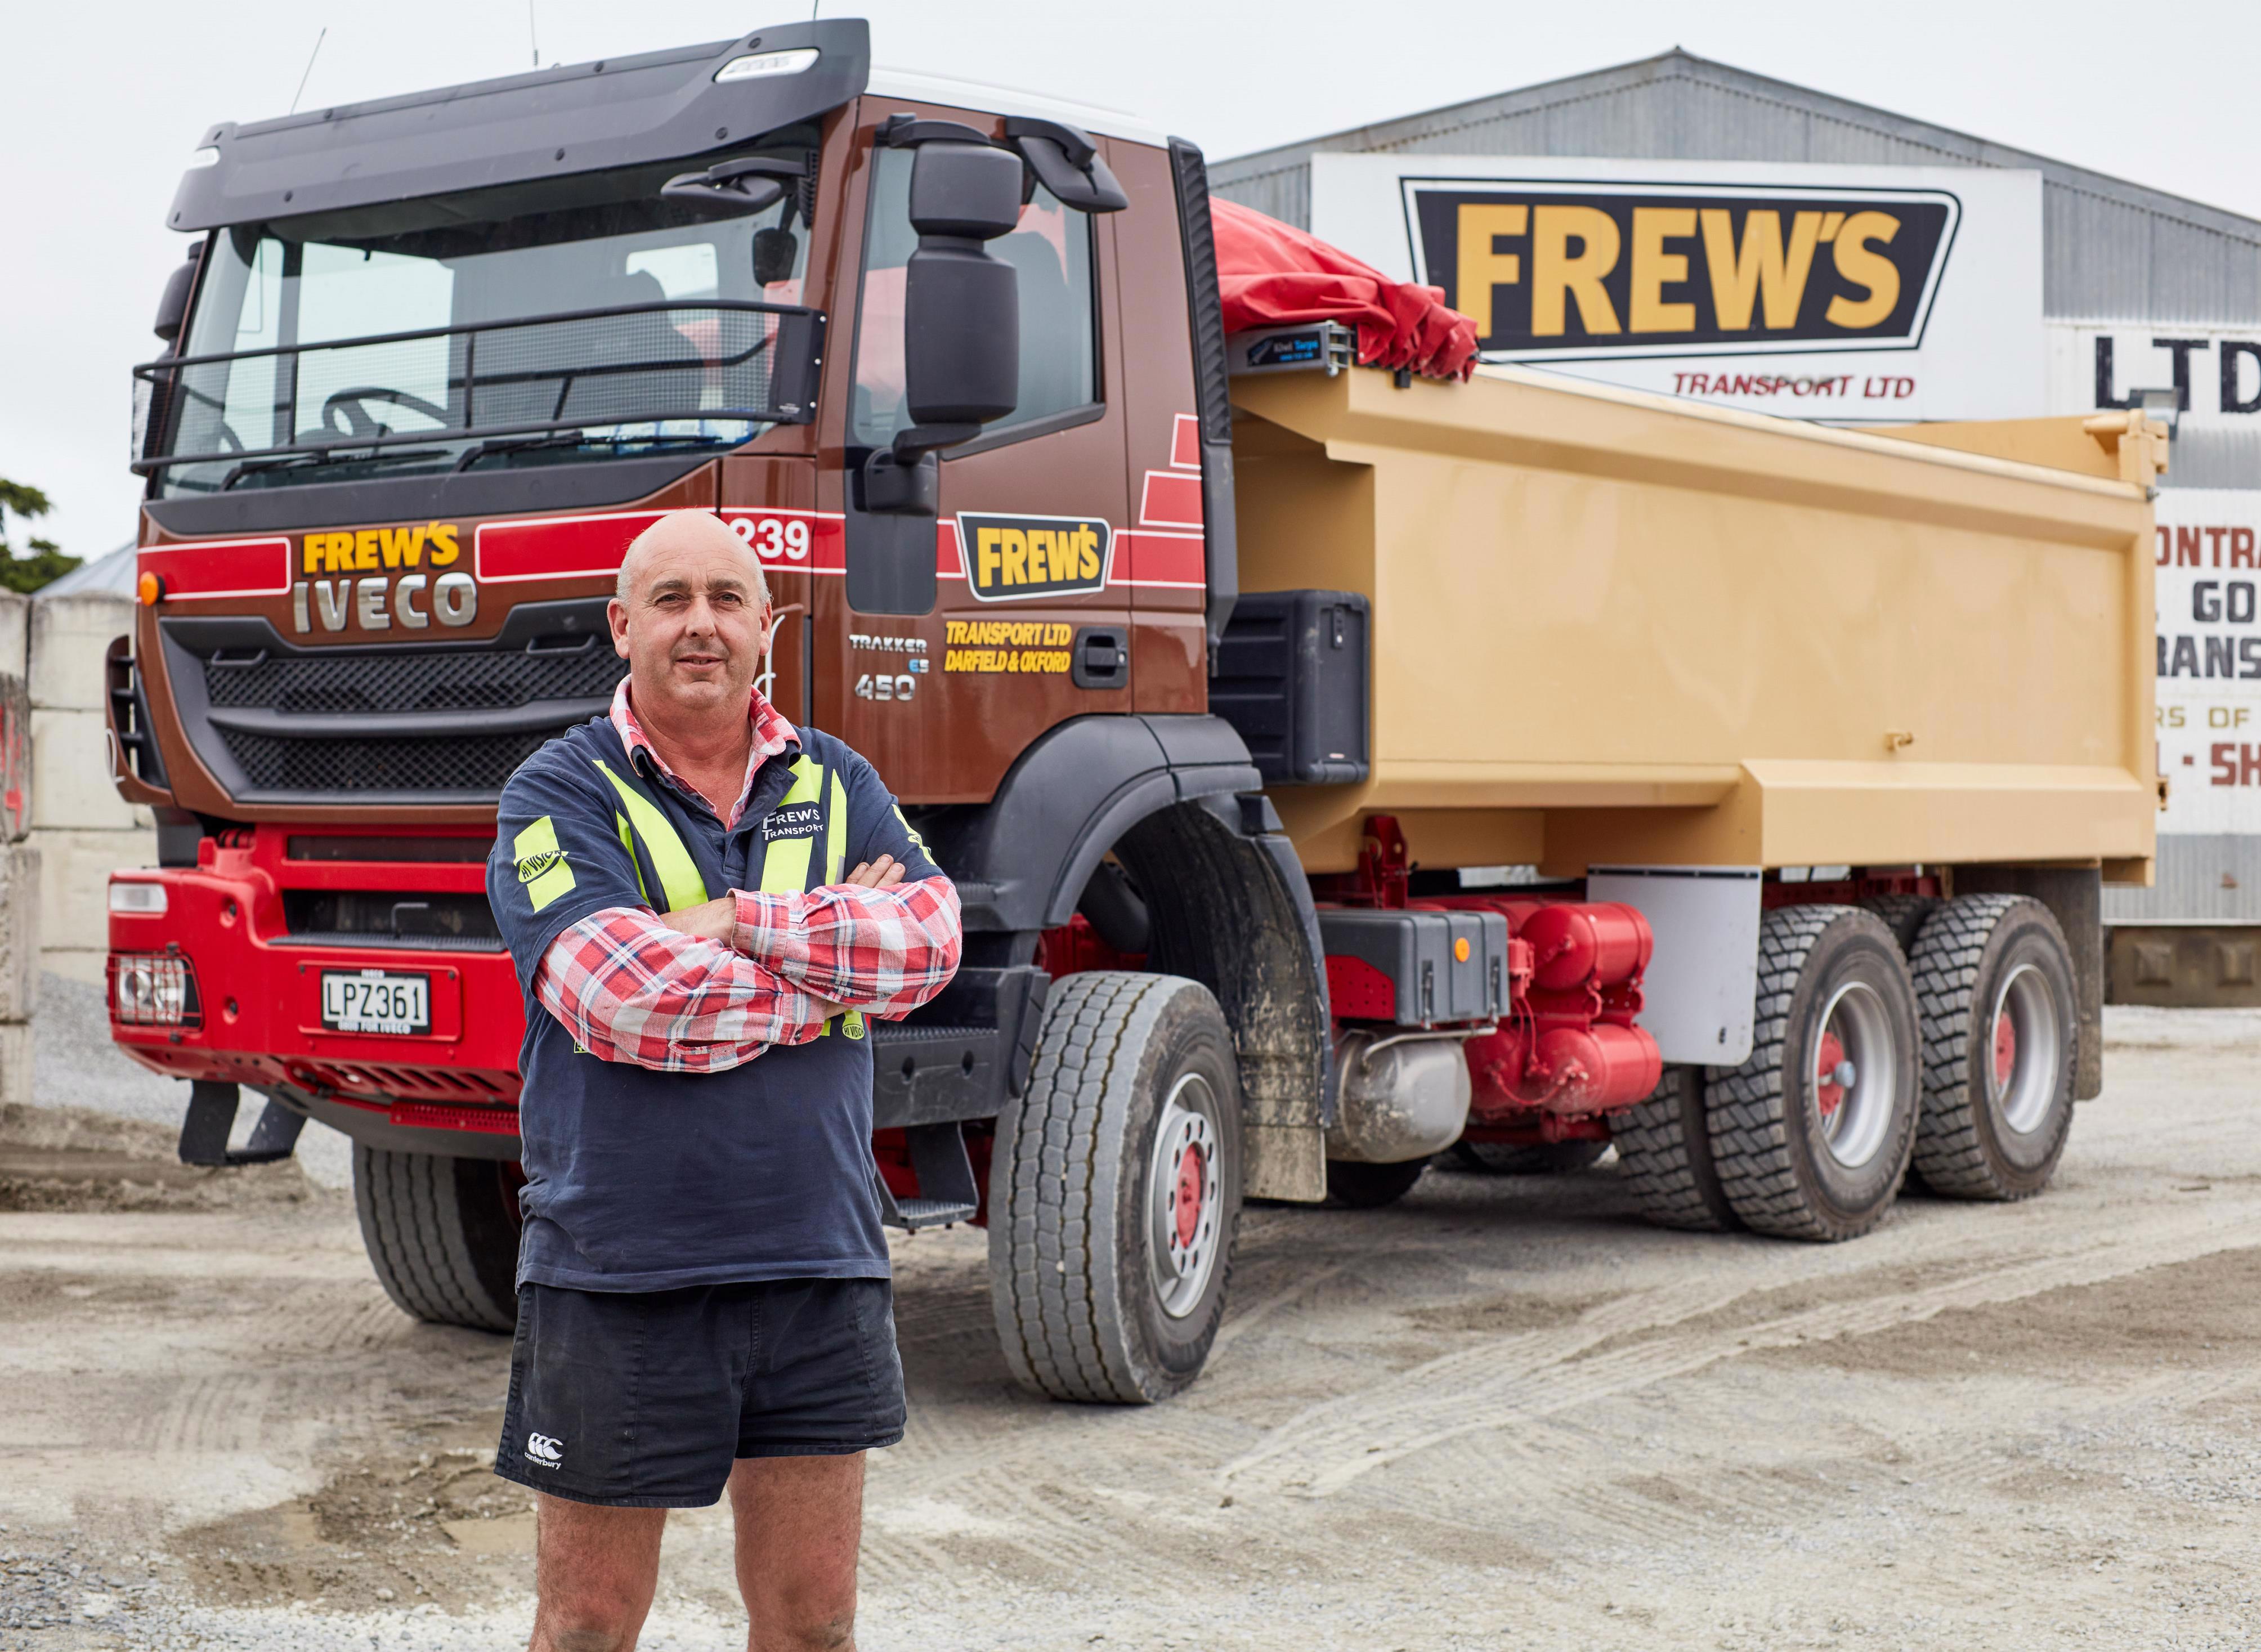 IVECO durability and strong back-up prove a winner for Frews Transport